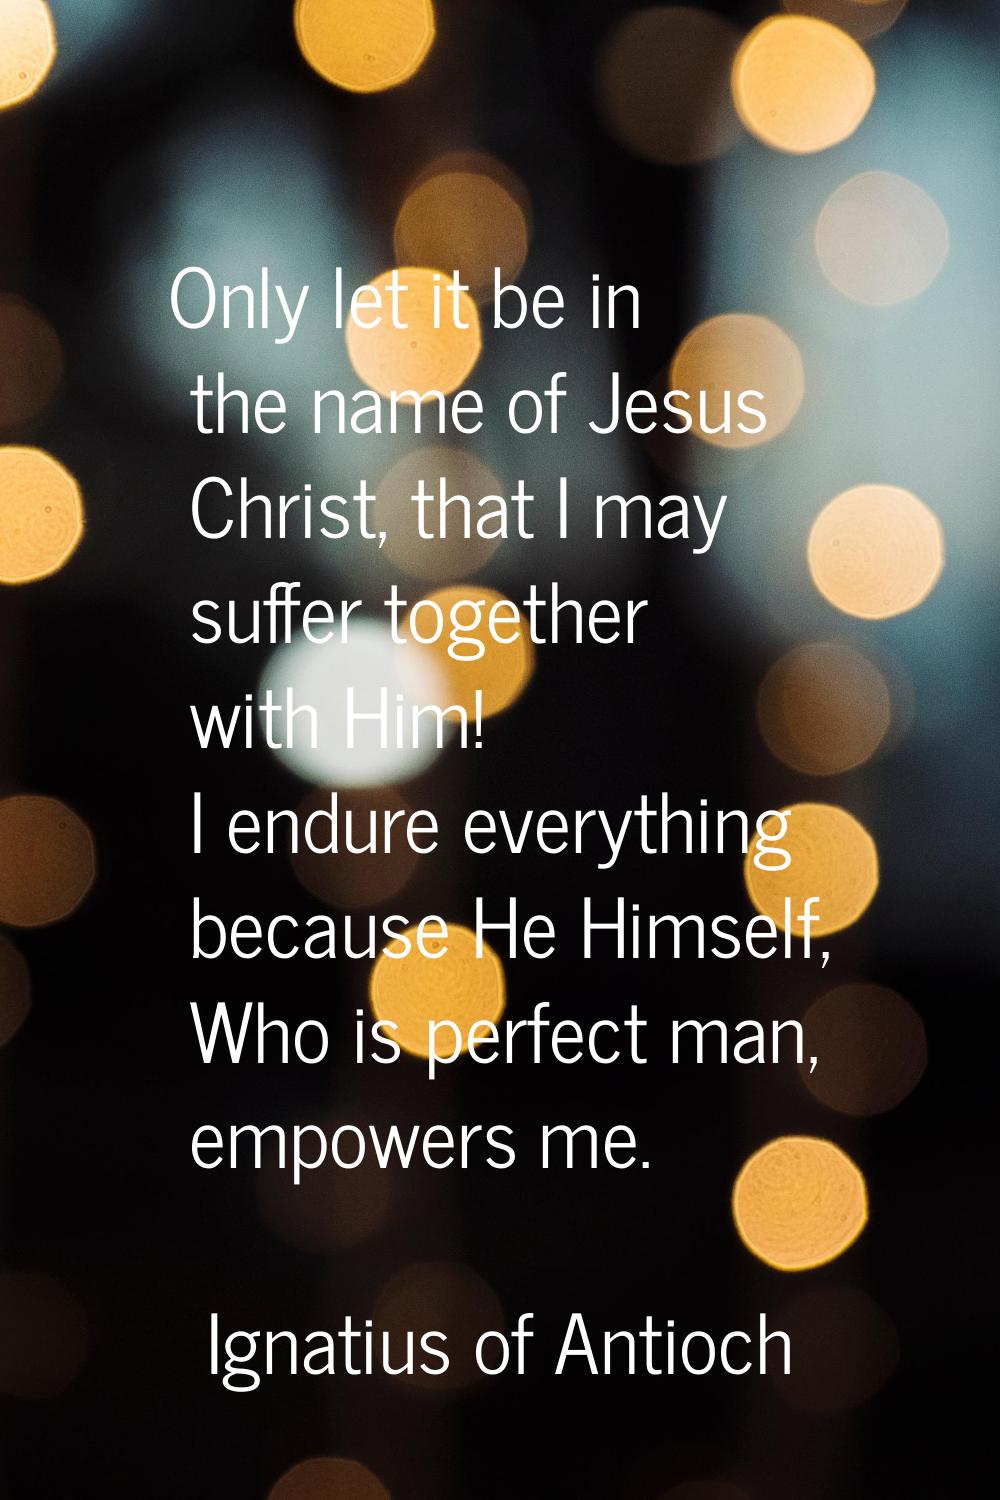 Only let it be in the name of Jesus Christ, that I may suffer together with Him! I endure everythin